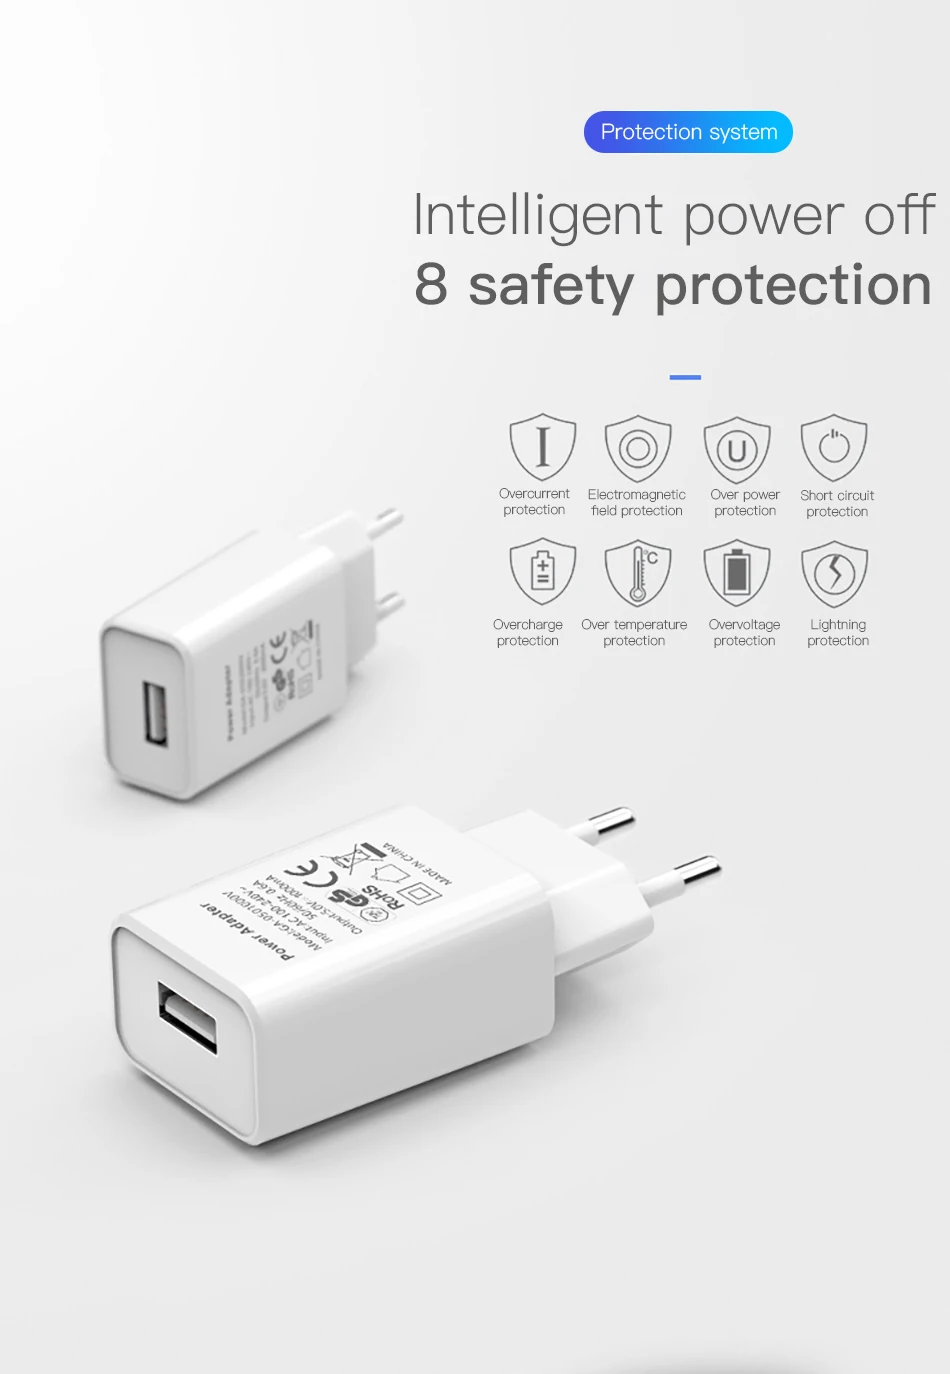 65w usb c charger !ACCEZZ Mobile Phone Charger 5V 1A Wall Charger For iPhone X 8 7 Plug EU Adapter For Samsung S9 Xiaomi mi 8 Huawei USB Charger phone charger